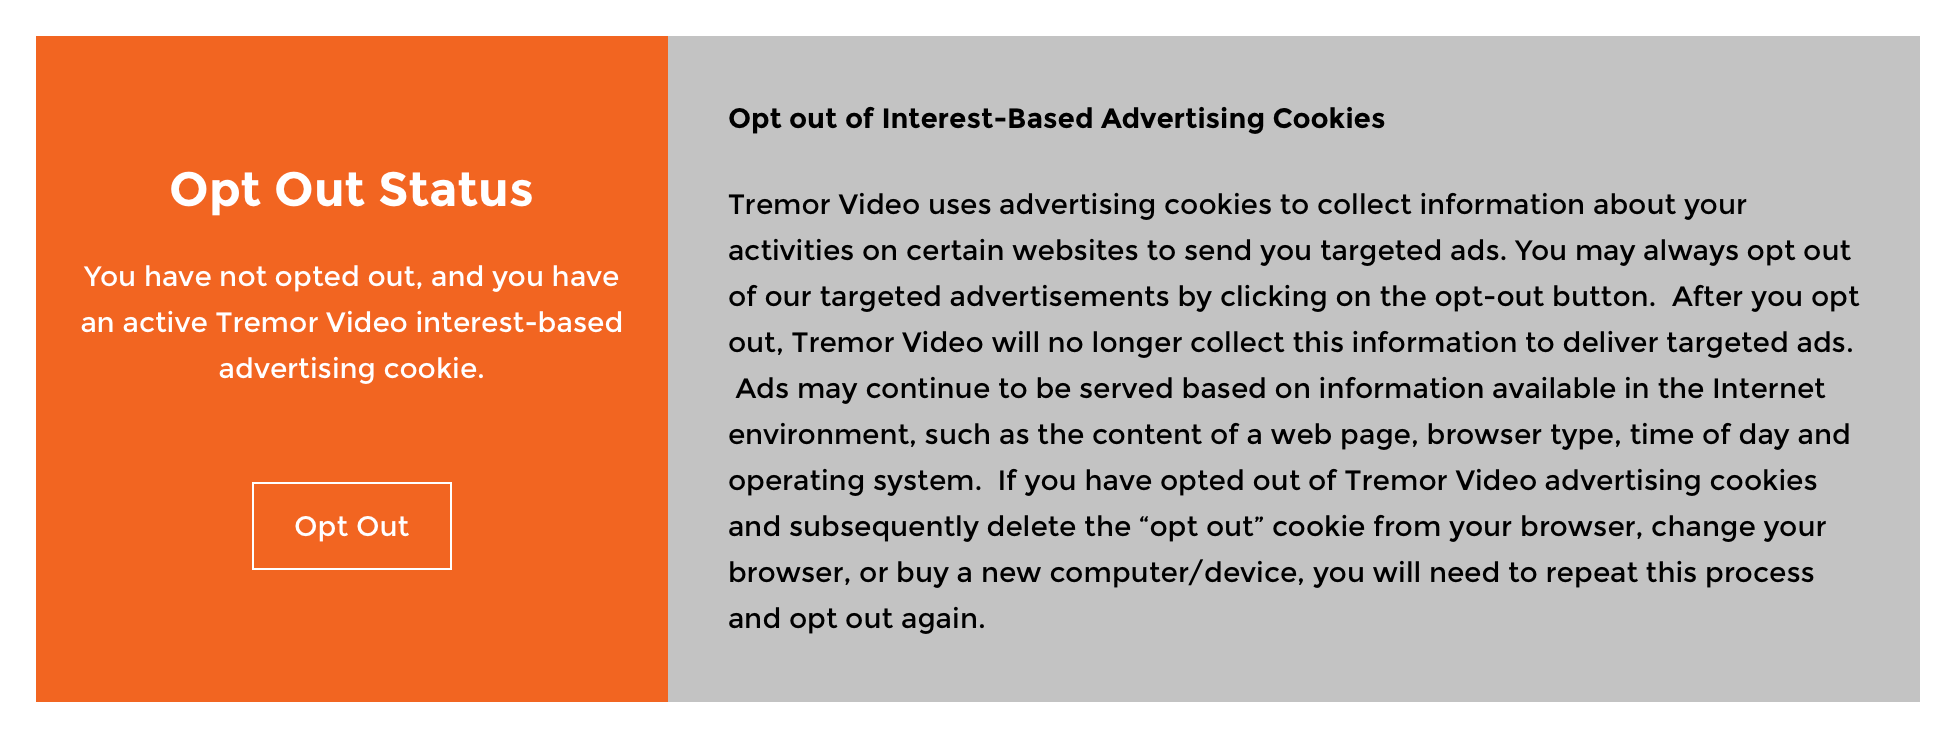 Opt-out: on every device, every time you clear your cookies.